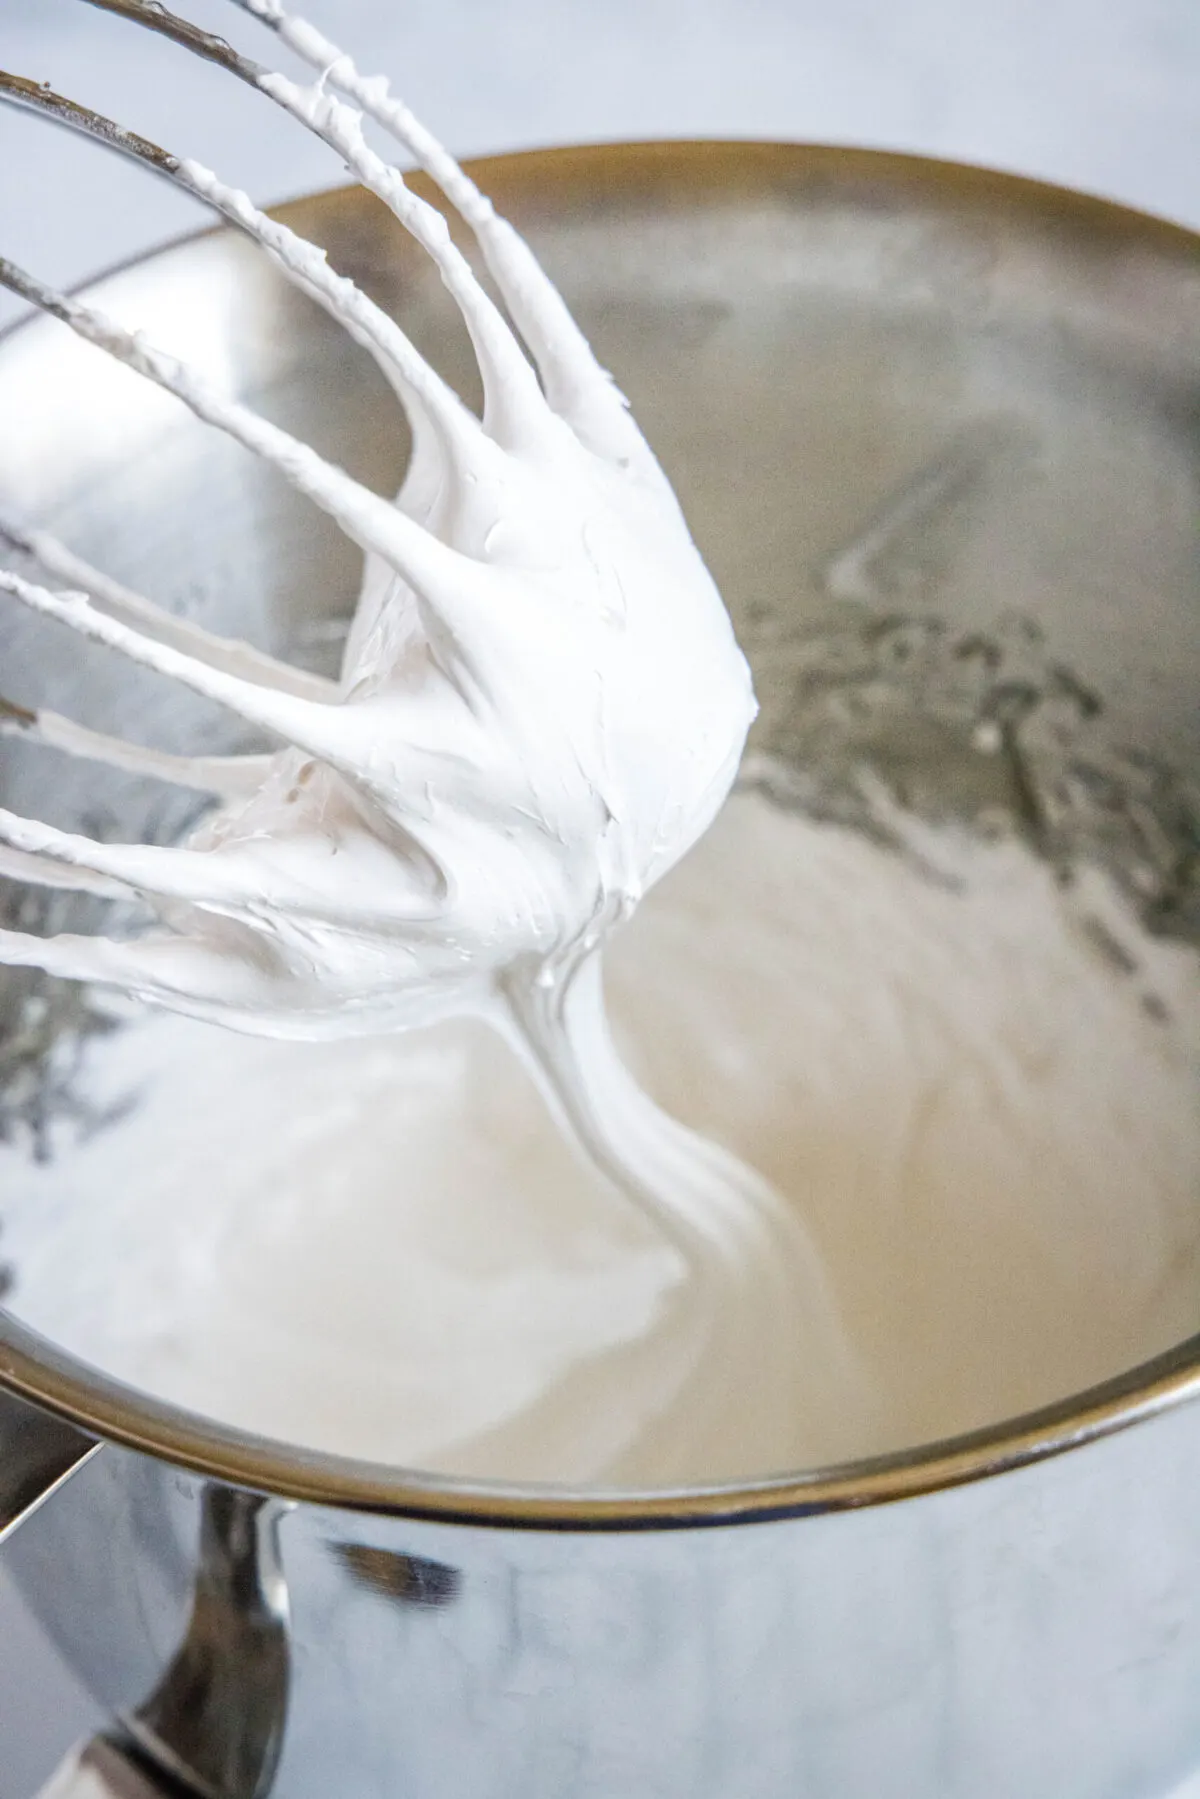 A stand mixer whisk attachment being pulled out of bowl filled with marshmallow fluff